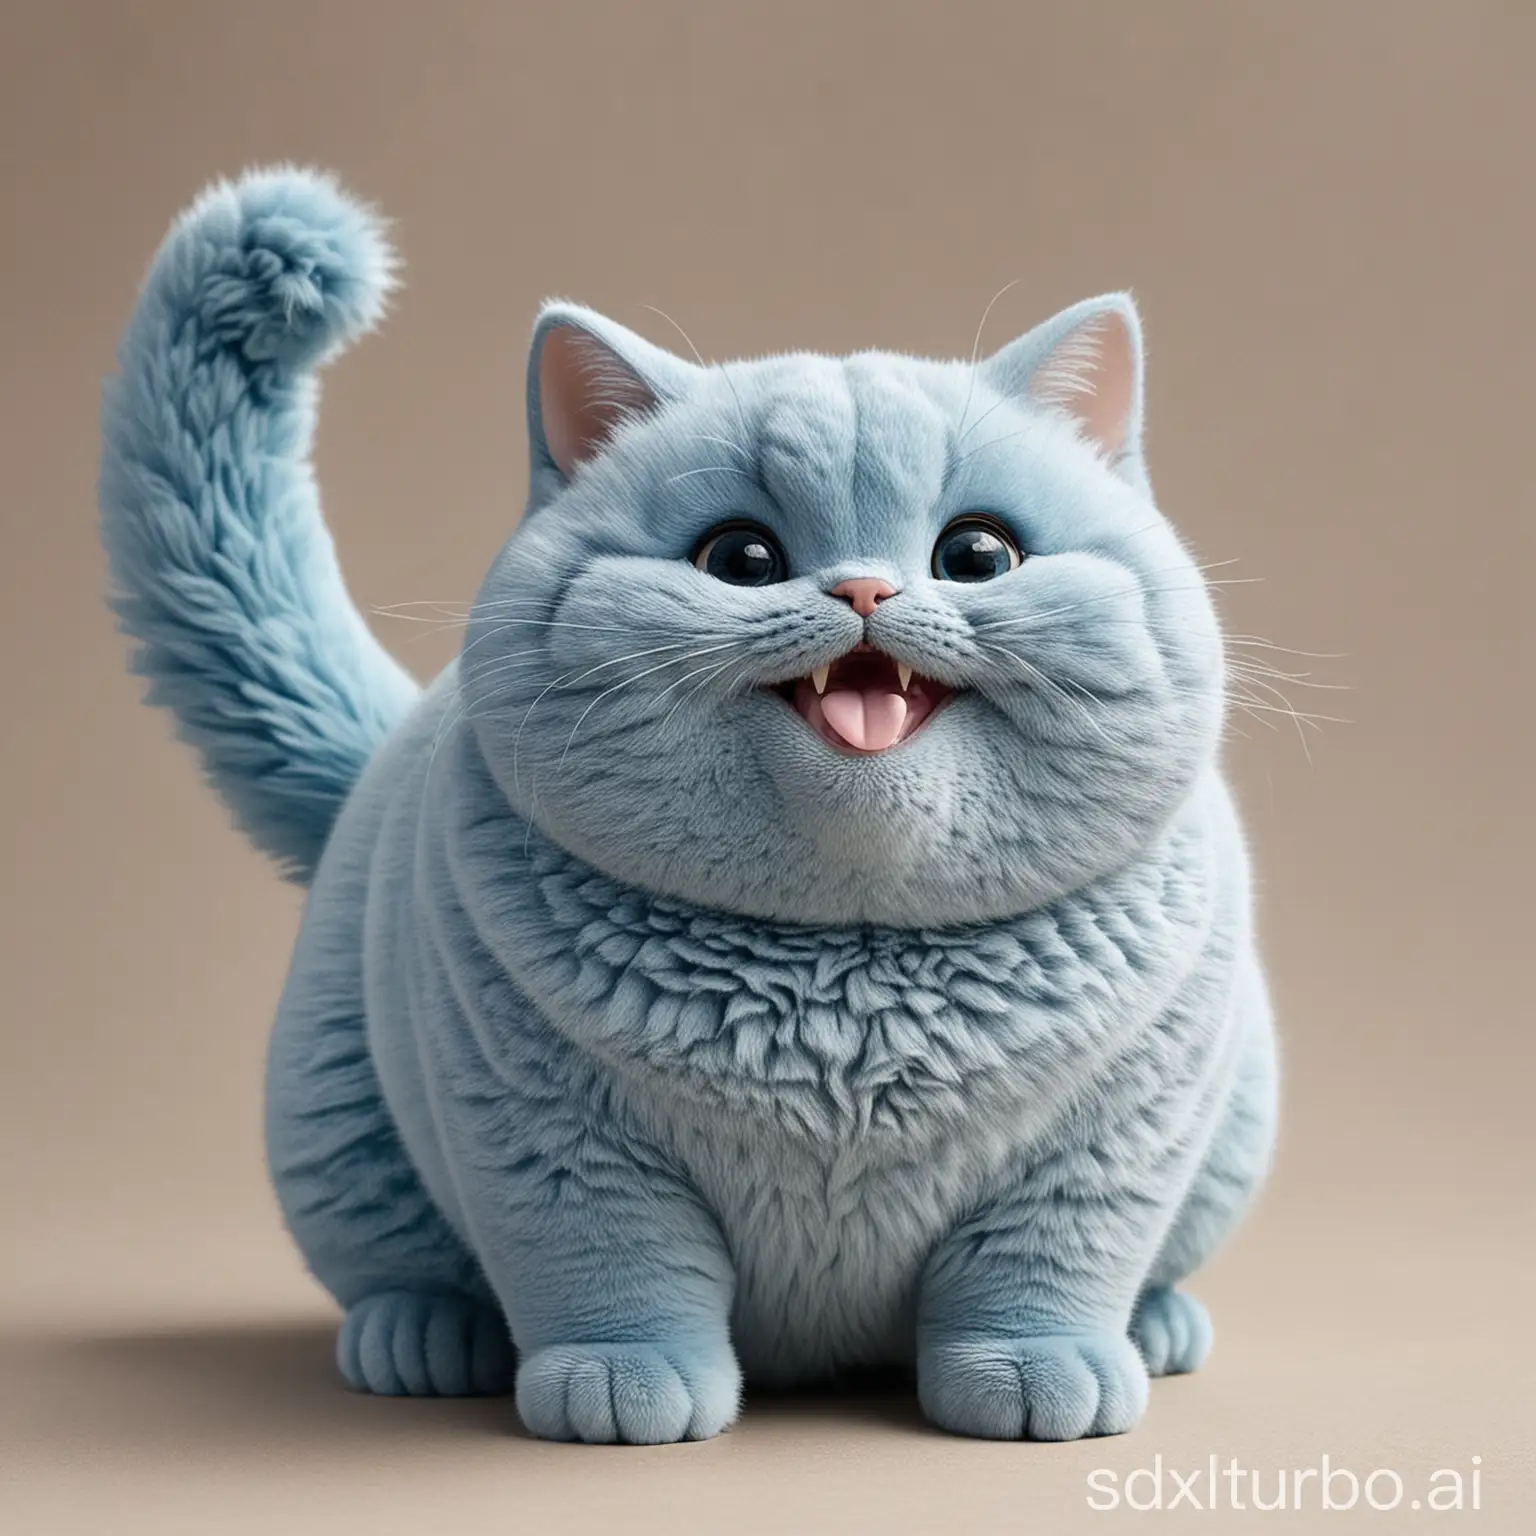 Cheerful-Blue-Cat-with-a-Plump-Appearance